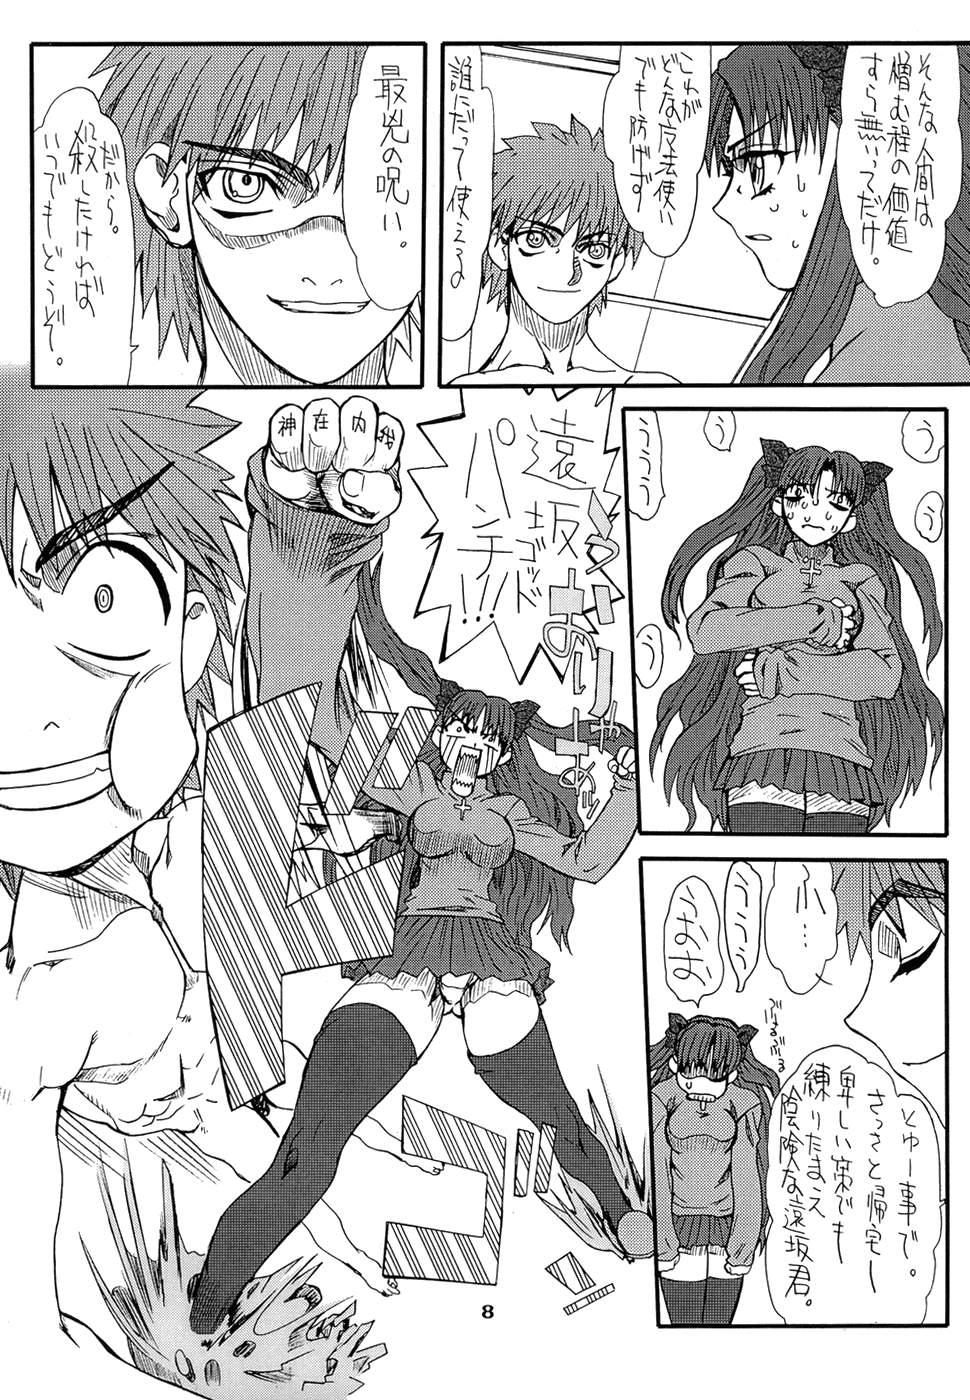 Flexible Akihime San - Fate stay night Dick Sucking Porn - Page 8